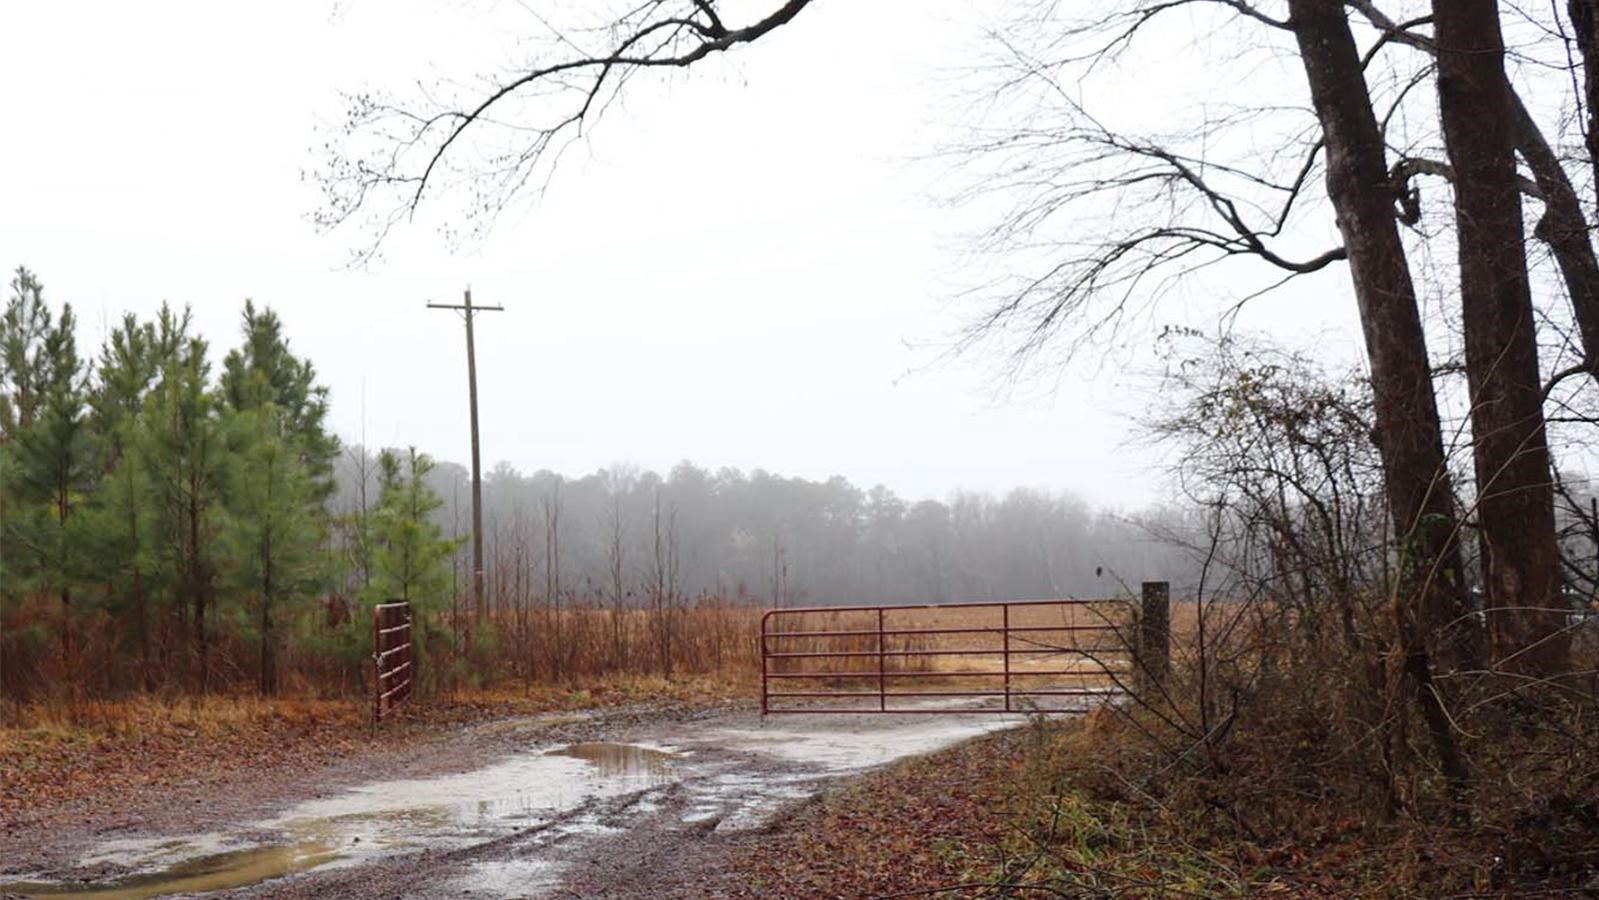 Dirt road with an open gate, evergreen trees in the background